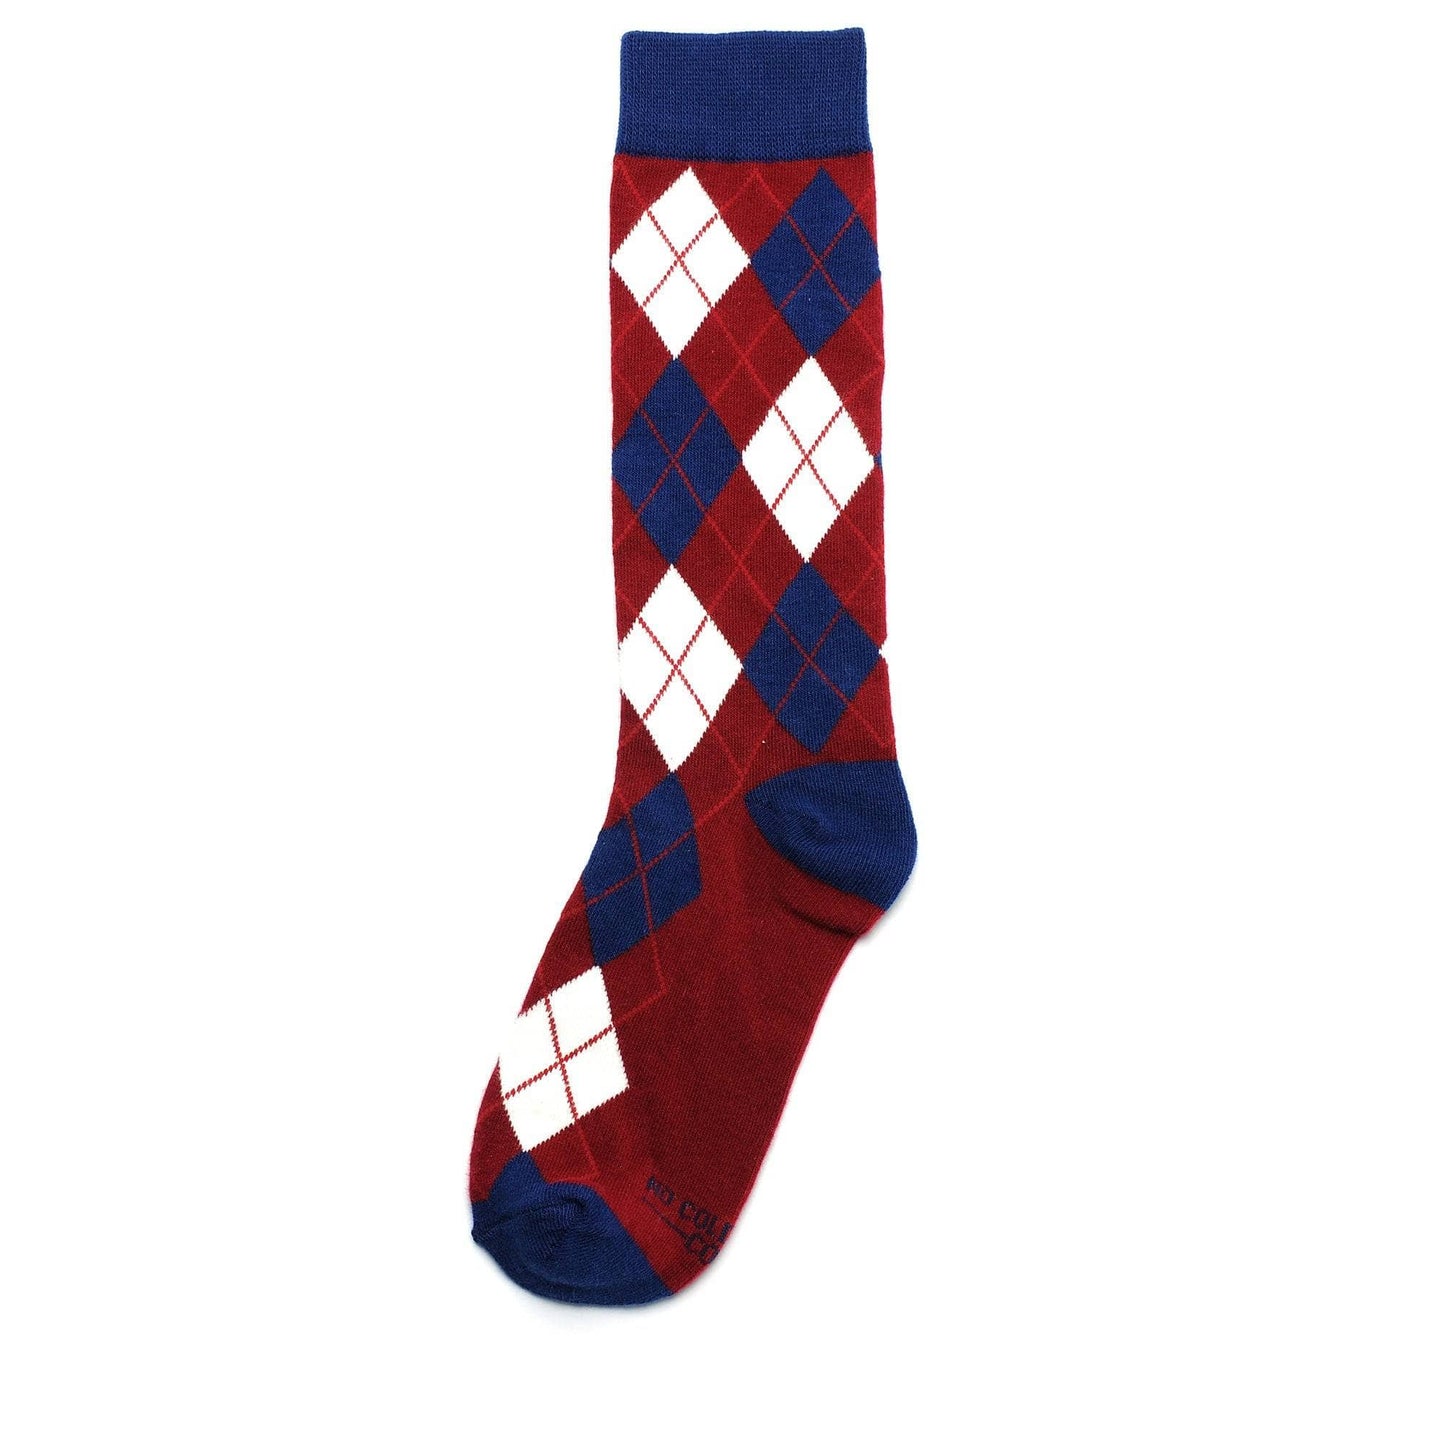 The No Cold Feet - Burgundy - Men's Gifts - Manly Bands